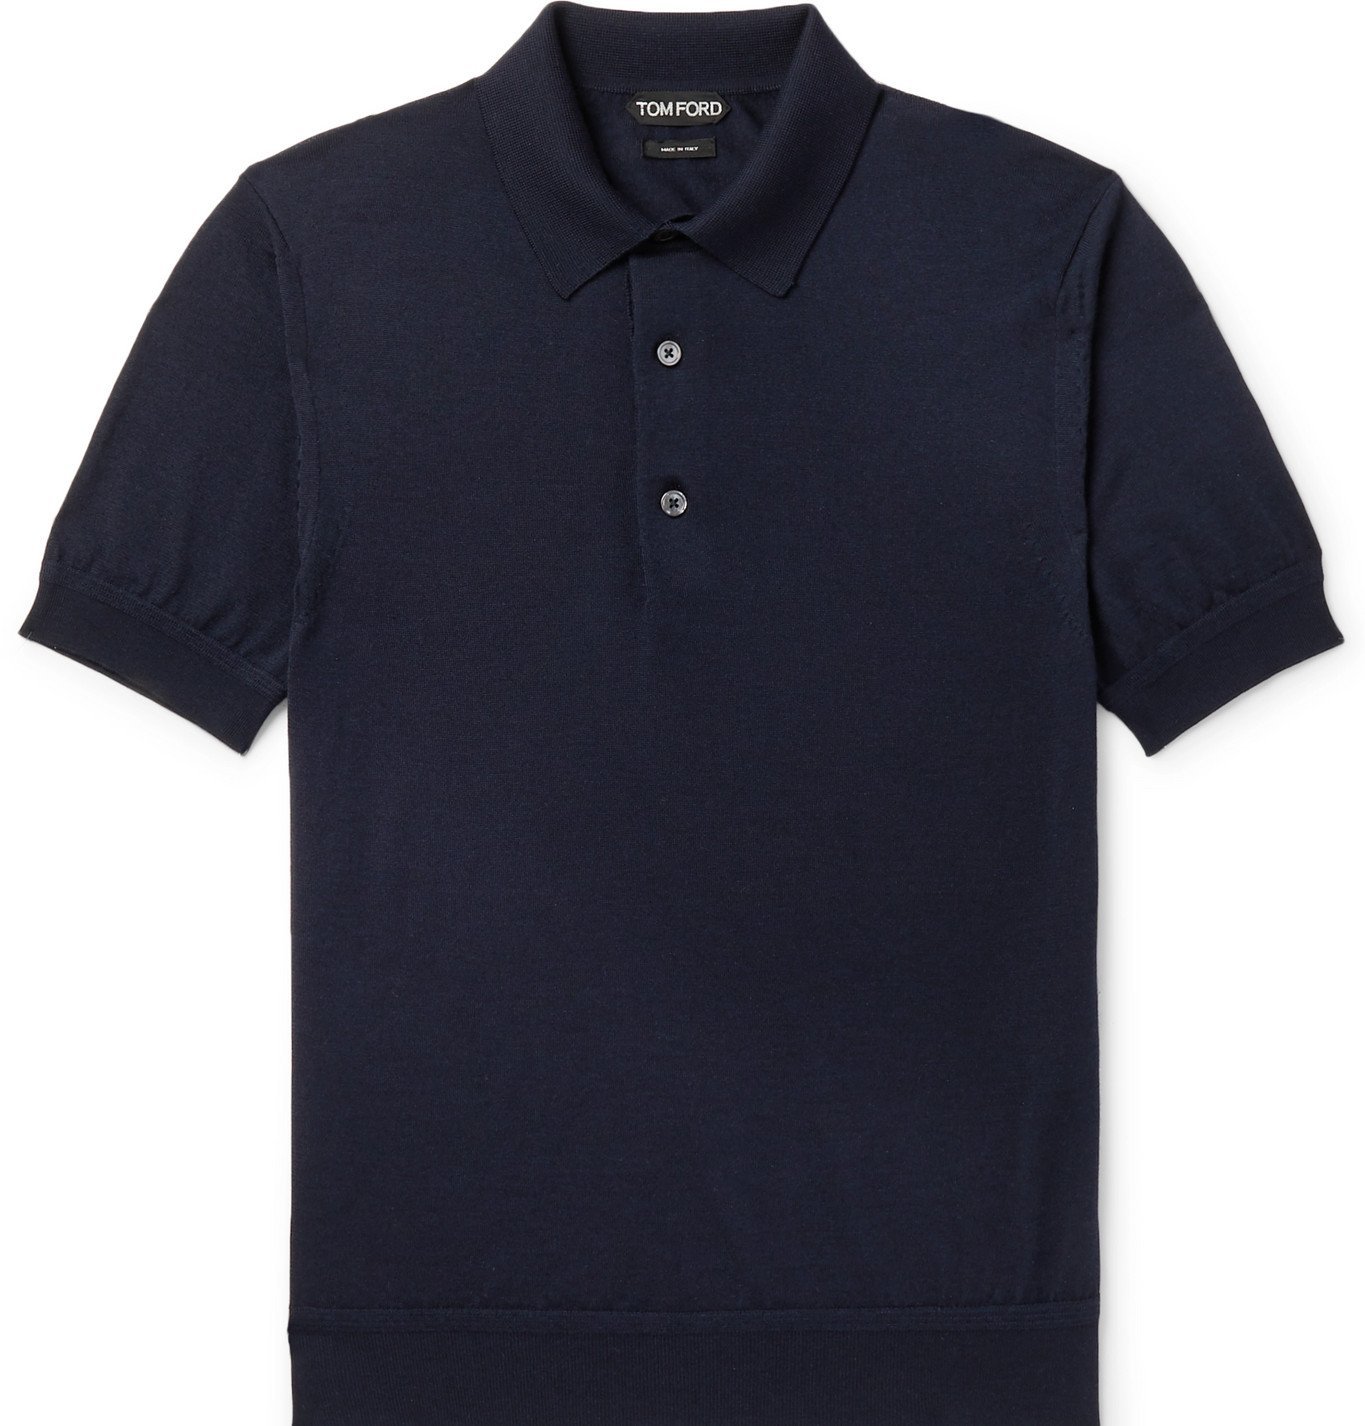 TOM FORD - Cashmere and Silk-Blend Polo Shirt - Blue TOM FORD